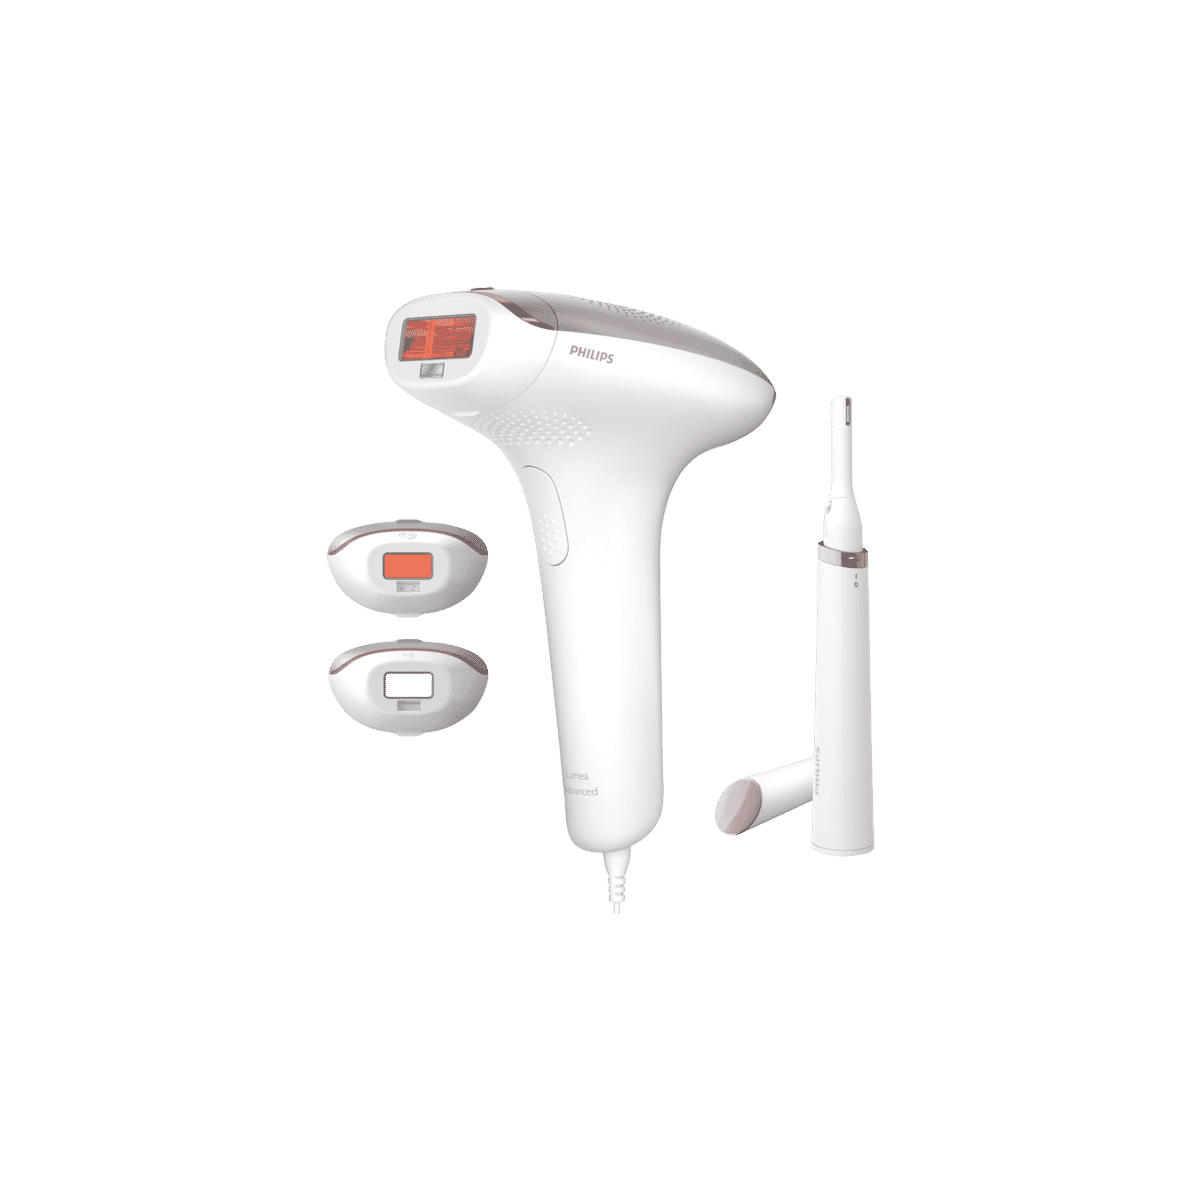 Philips BRI923/00 Lumea Advanced IPL Hair Removal Device at The Good Guys